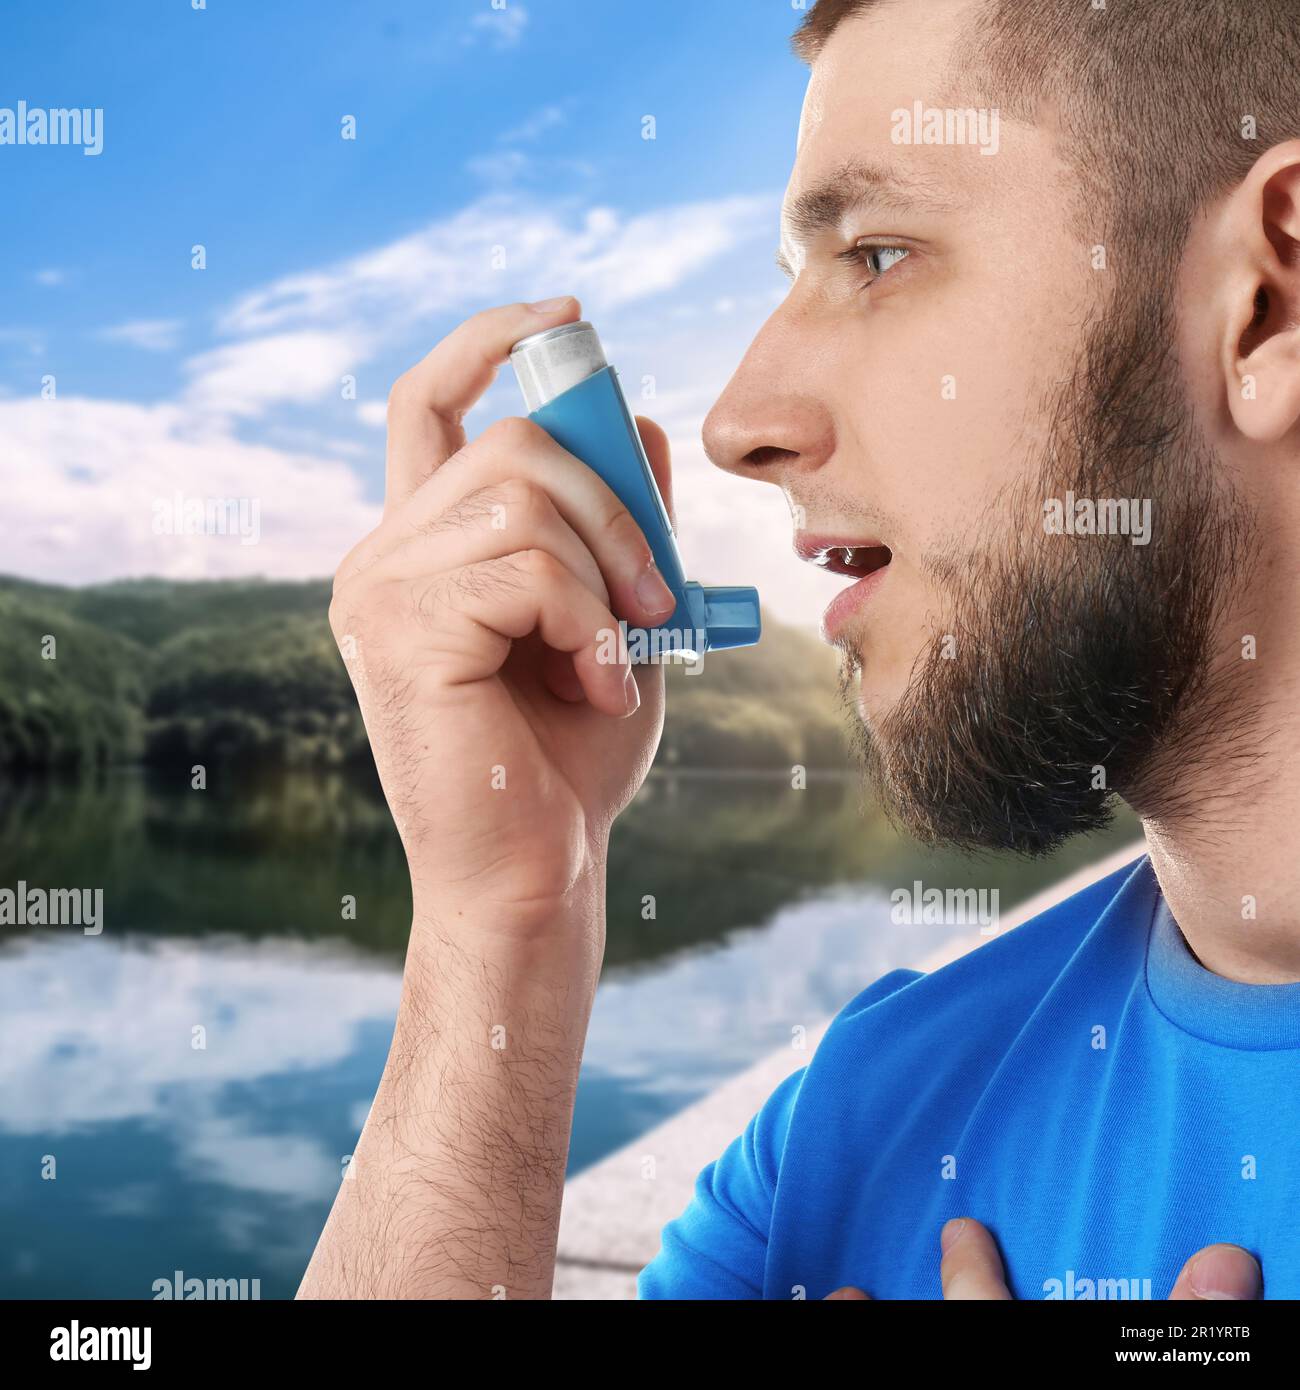 Man using asthma inhaler near lake. Emergency first aid during outdoor recreation Stock Photo